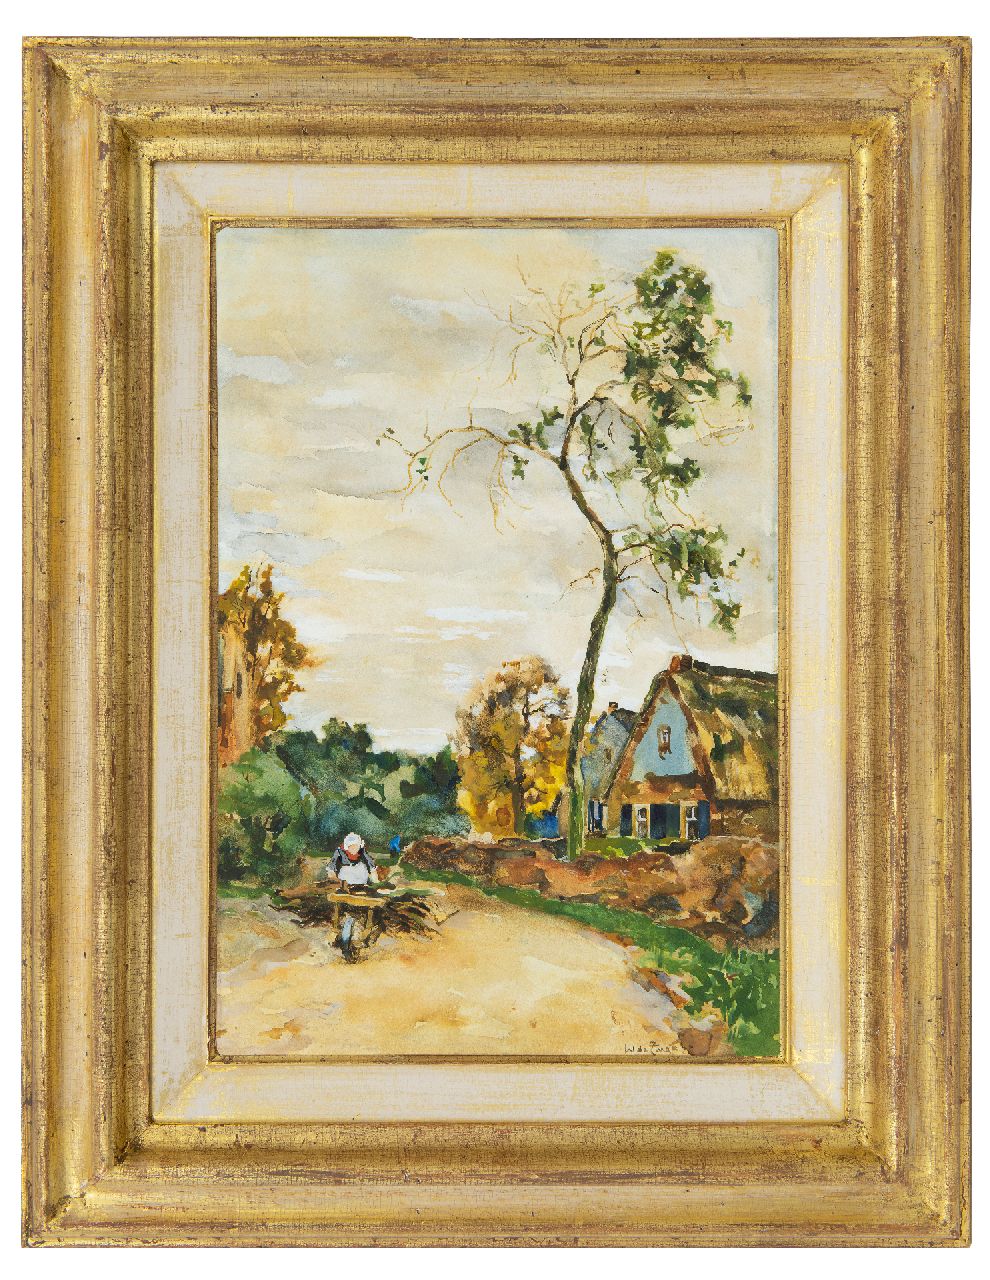 Zwart W.H.P.J. de | Wilhelmus Hendrikus Petrus Johannes 'Willem' de Zwart | Watercolours and drawings offered for sale | Peasant woman with wheelbarrow, watercolour on paper 35.6 x 24.7 cm, signed l.r. and painted in the 1890's